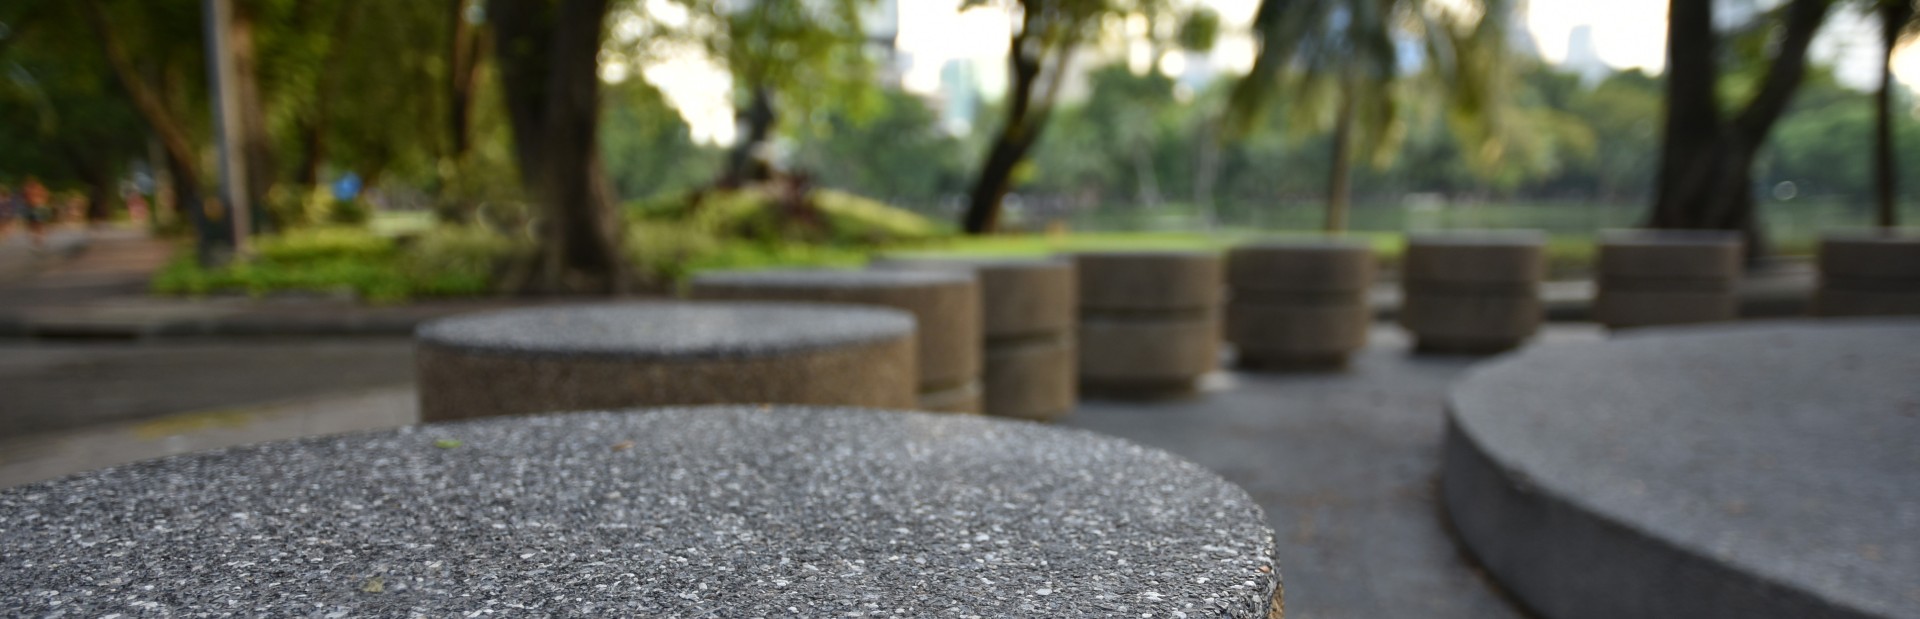 Circular ordered stone bollards with a background of grass and tree-trunks